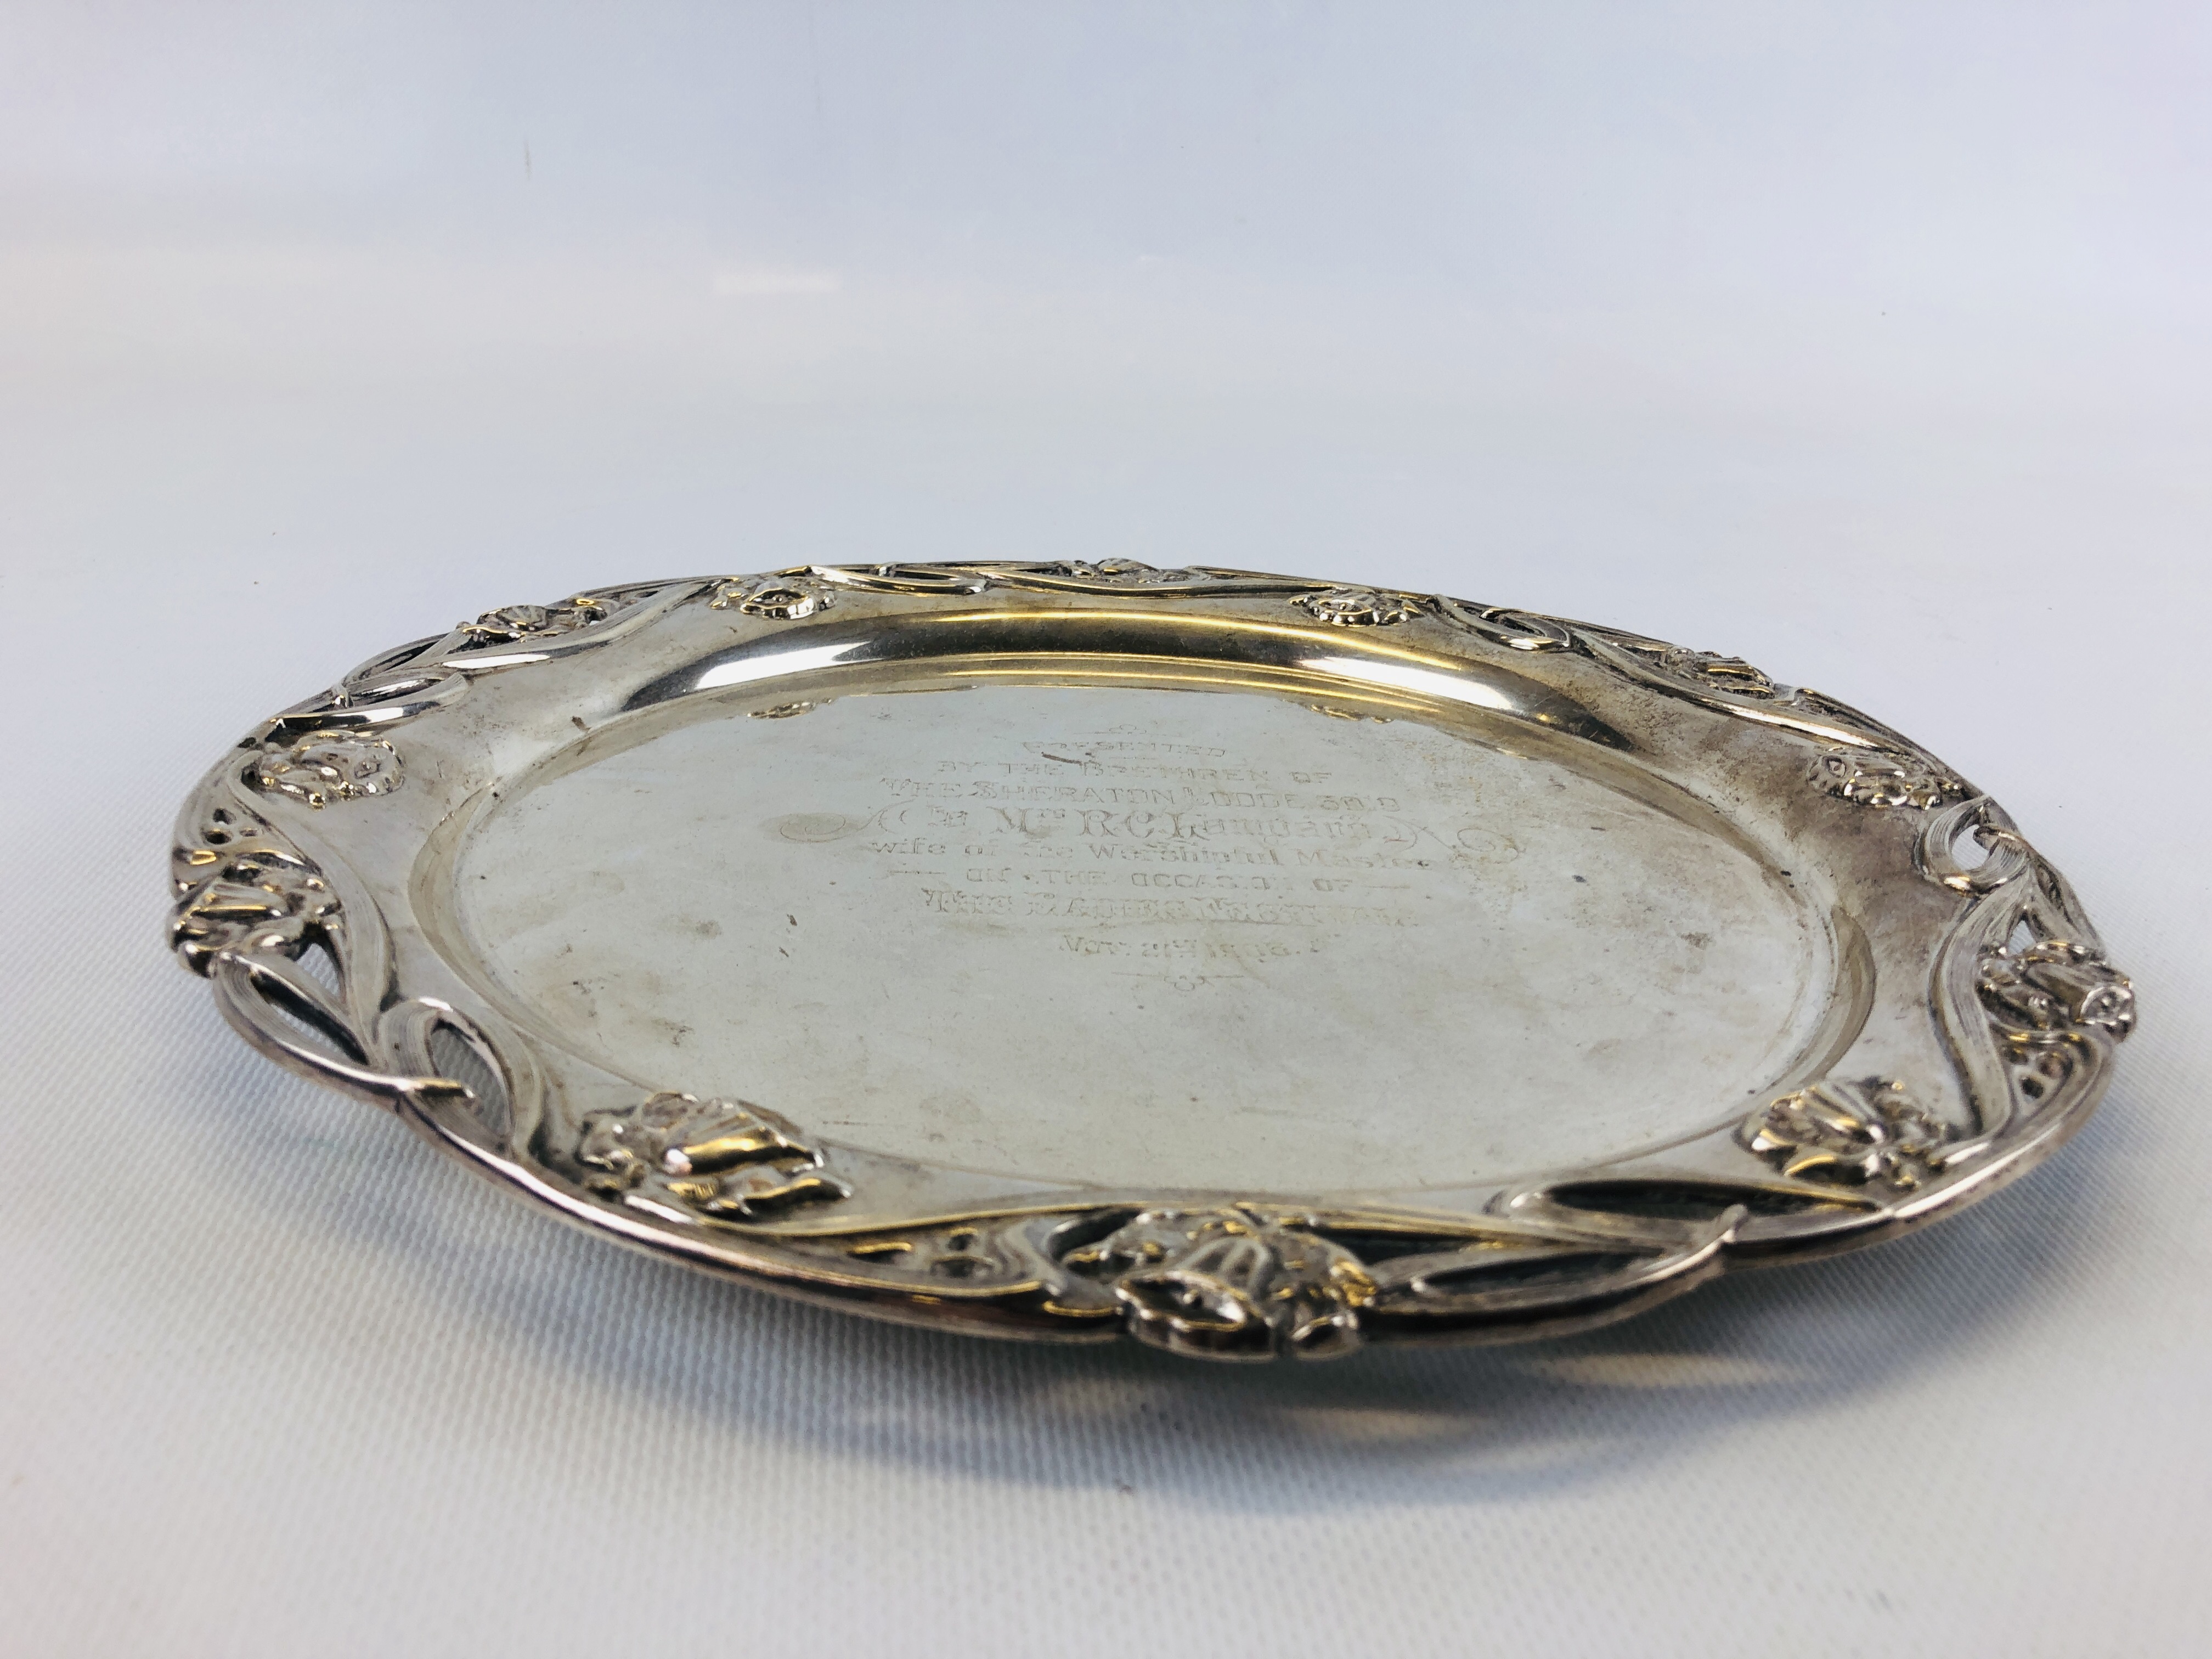 SILVER SALVER PEARCE BORDER AND ENGRAVED WILLIAM HUTTON AND SON SHEFFIELD 1905. - Image 3 of 11